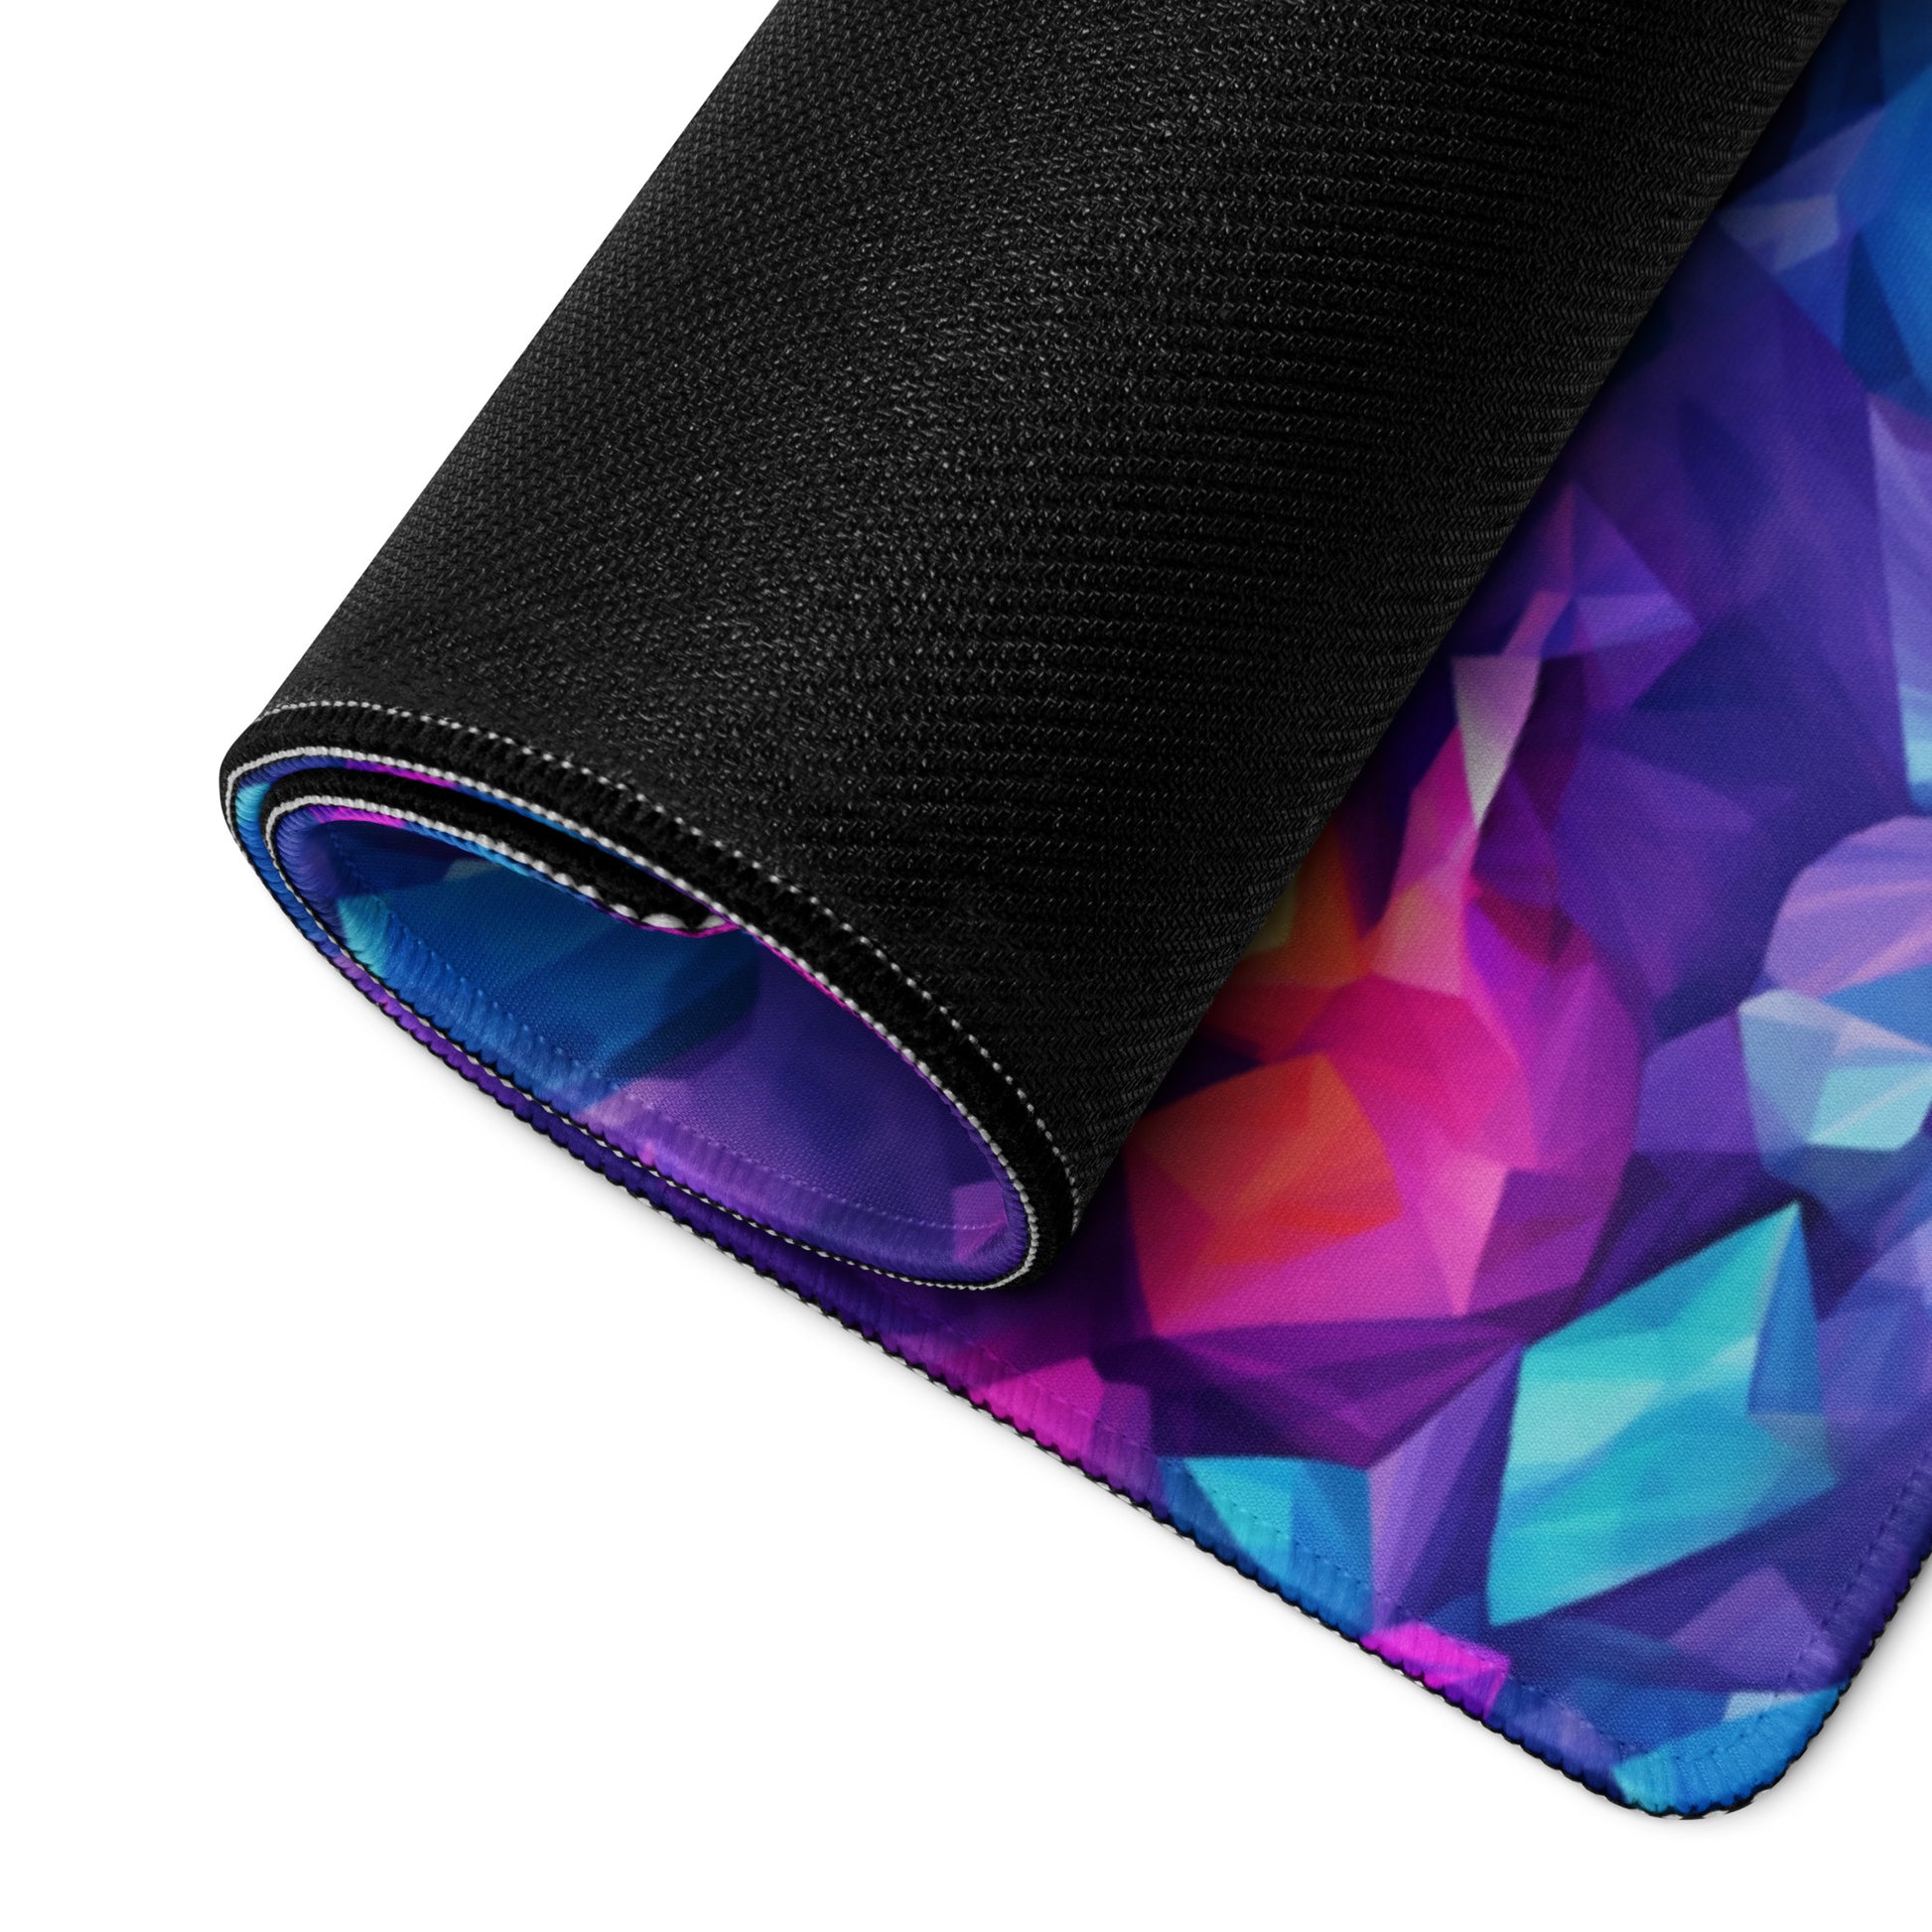 A blue and purple crystal gaming desk pad rolled up.